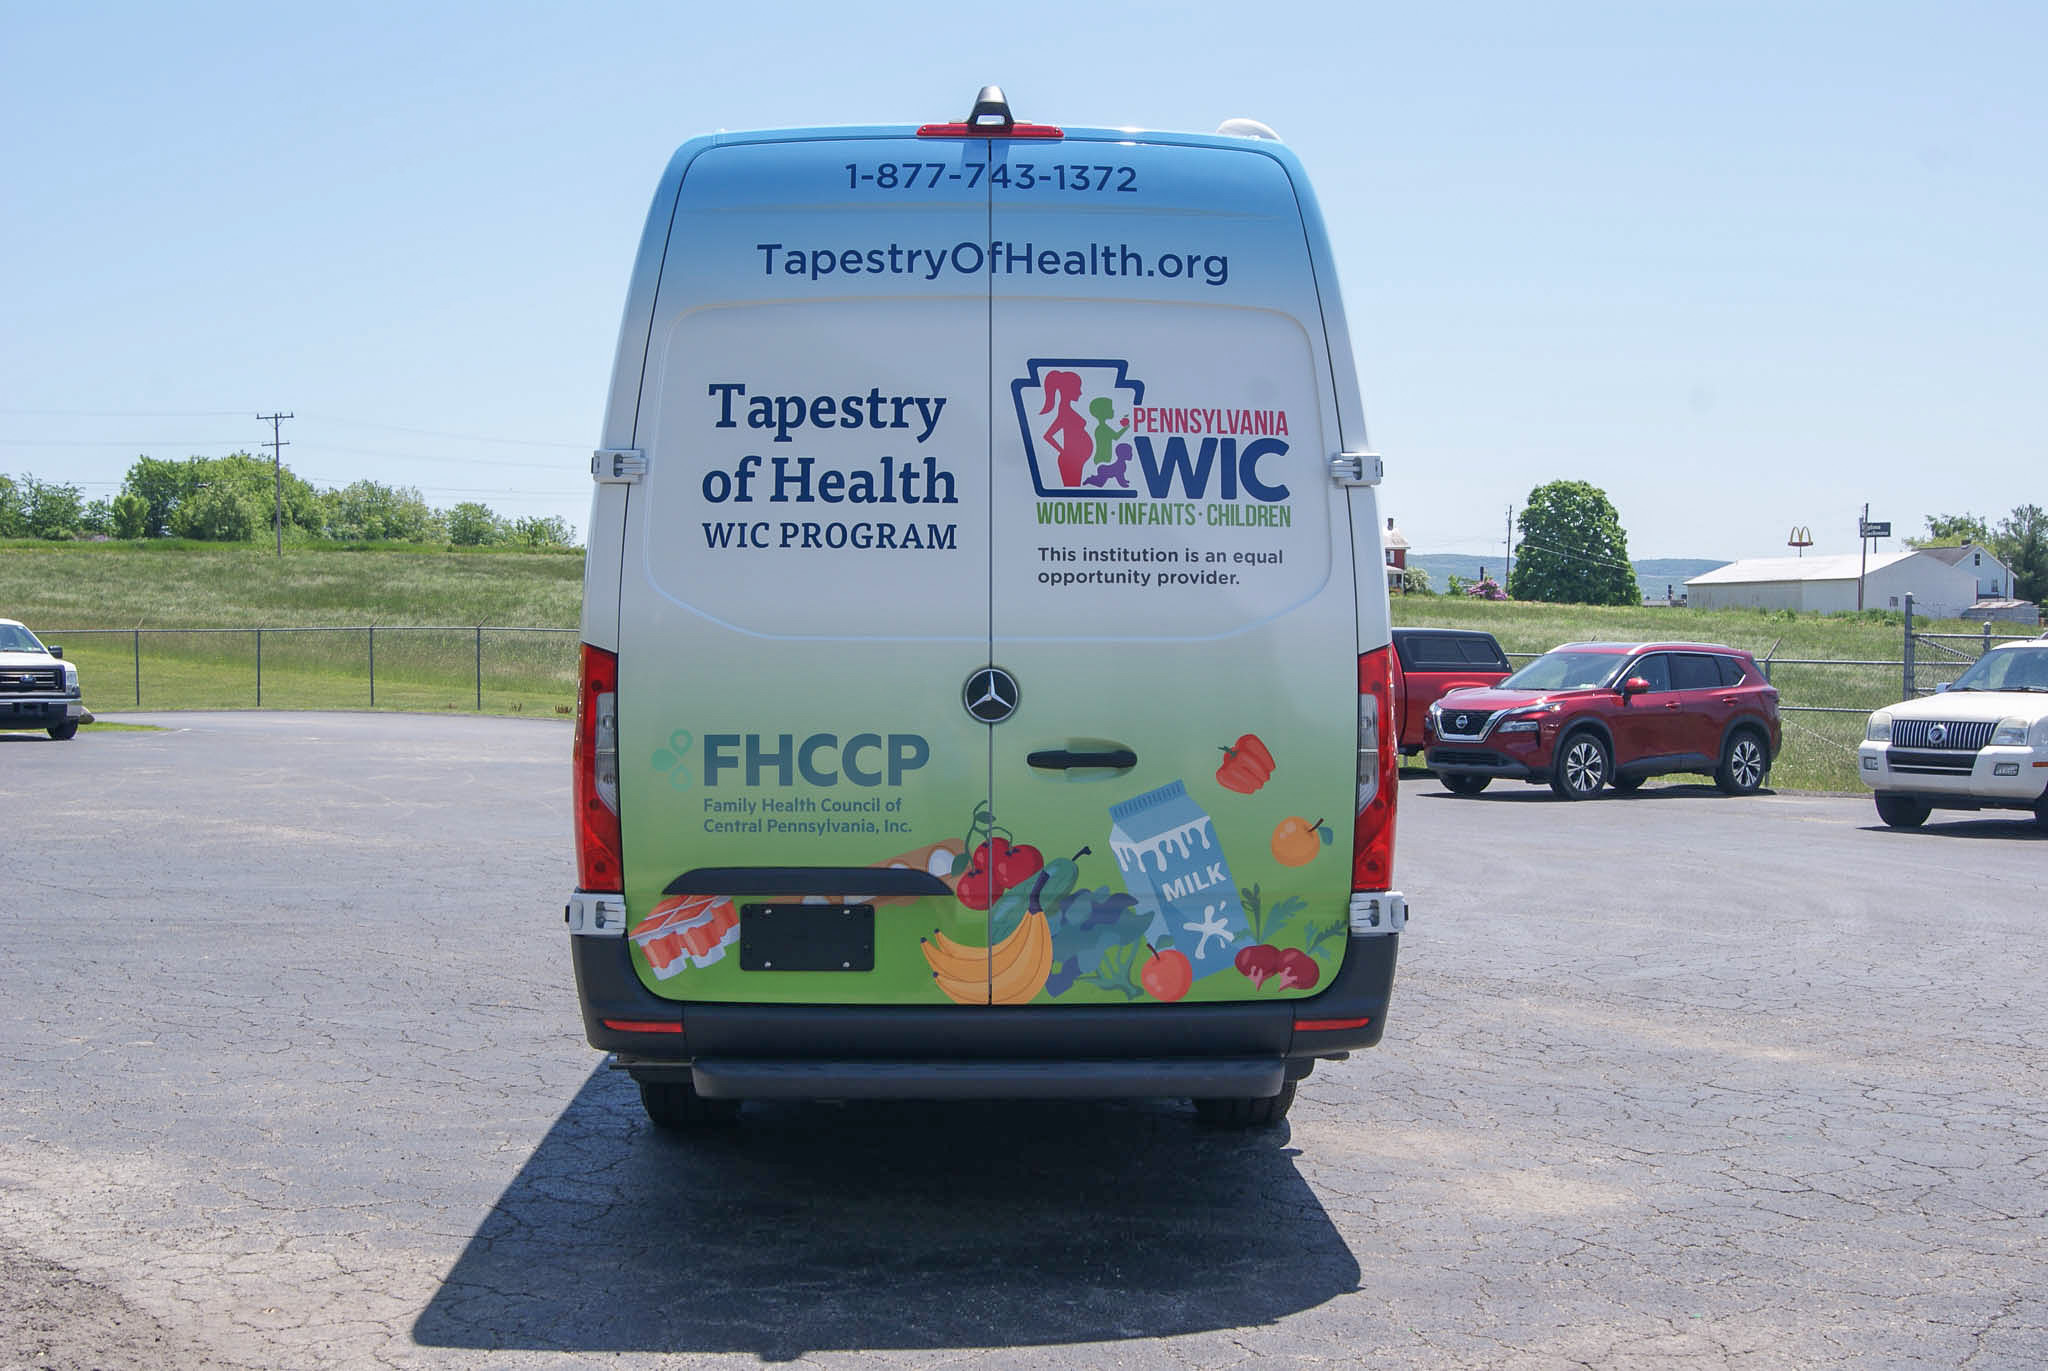 Direct view of the Mobile Outreach sprinter van's back doors and the decals. It features the Tapestry of Health's logo for the WIC program, their website, and their phone number.